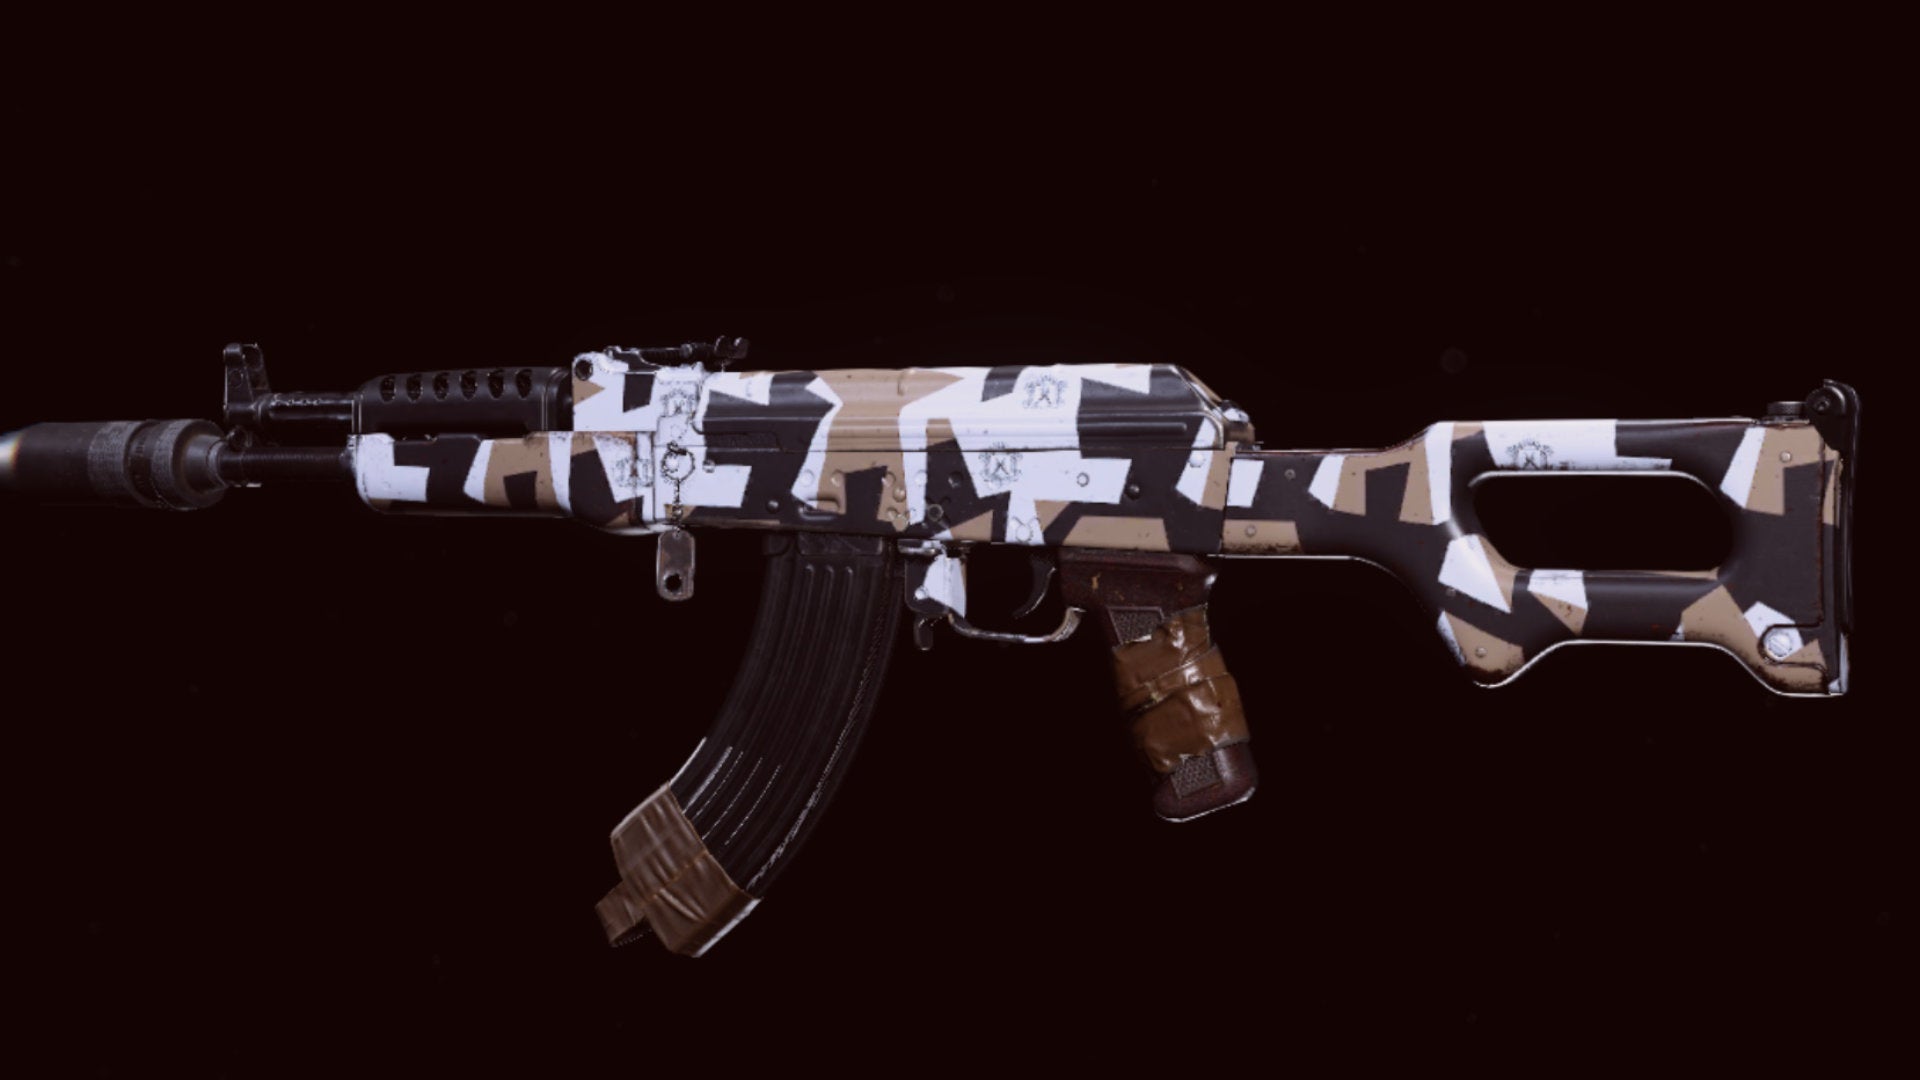 The Cold War AK-47 in Warzone on a blank background.